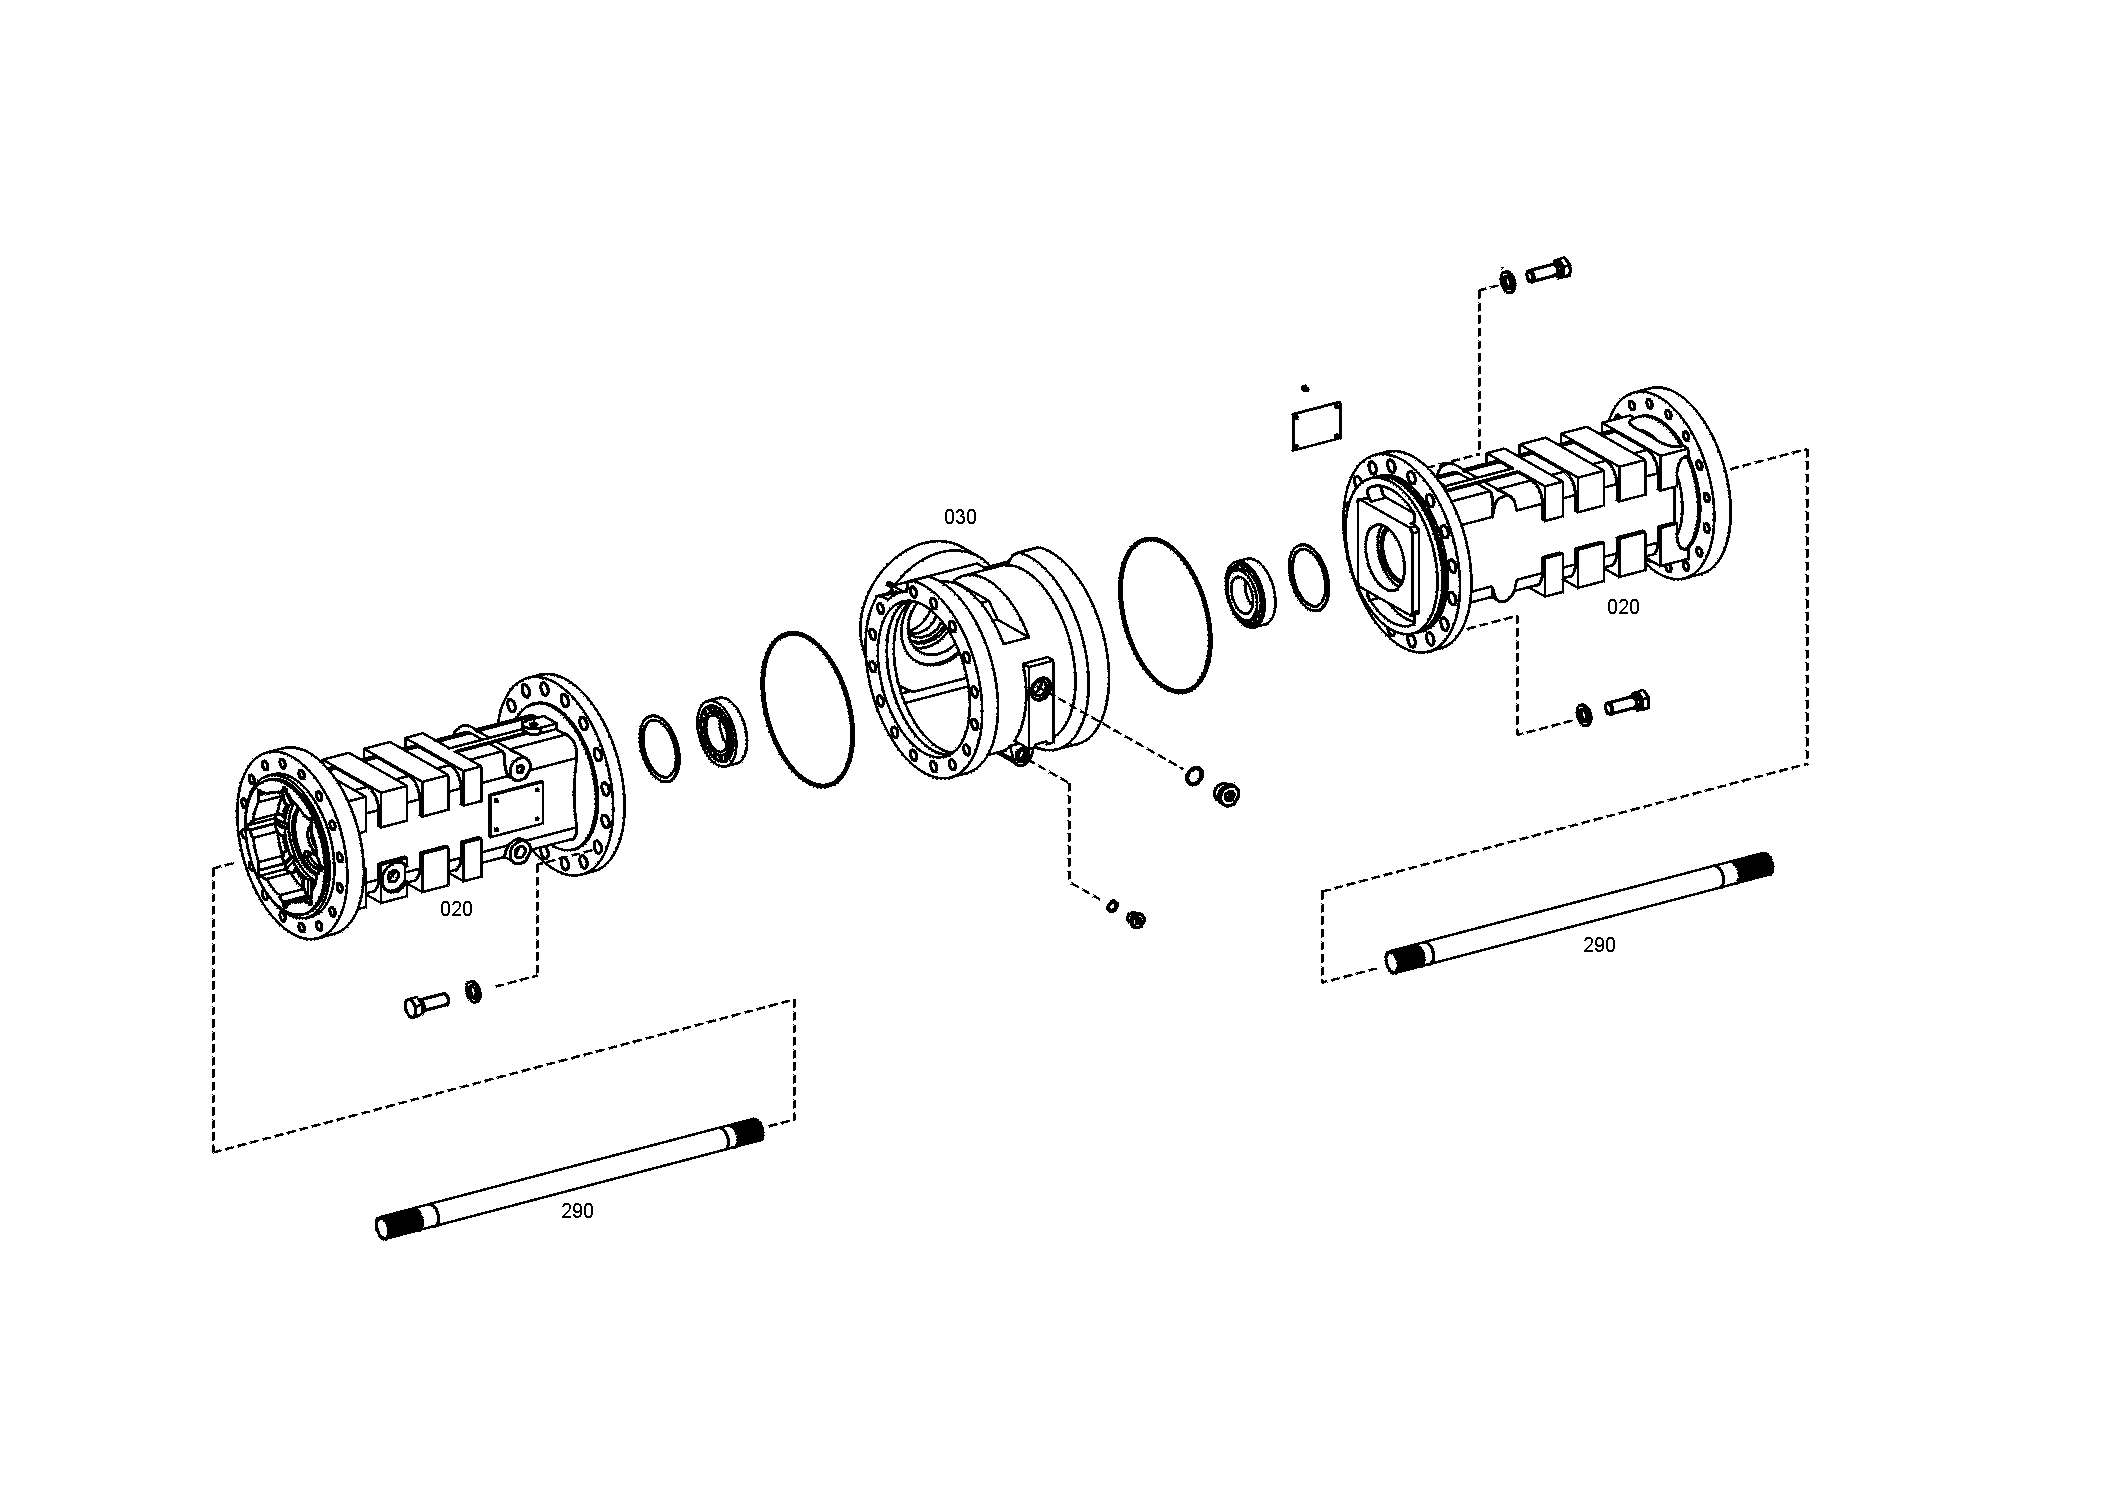 drawing for HAMM AG 01288539 - AXLE CASING (figure 2)